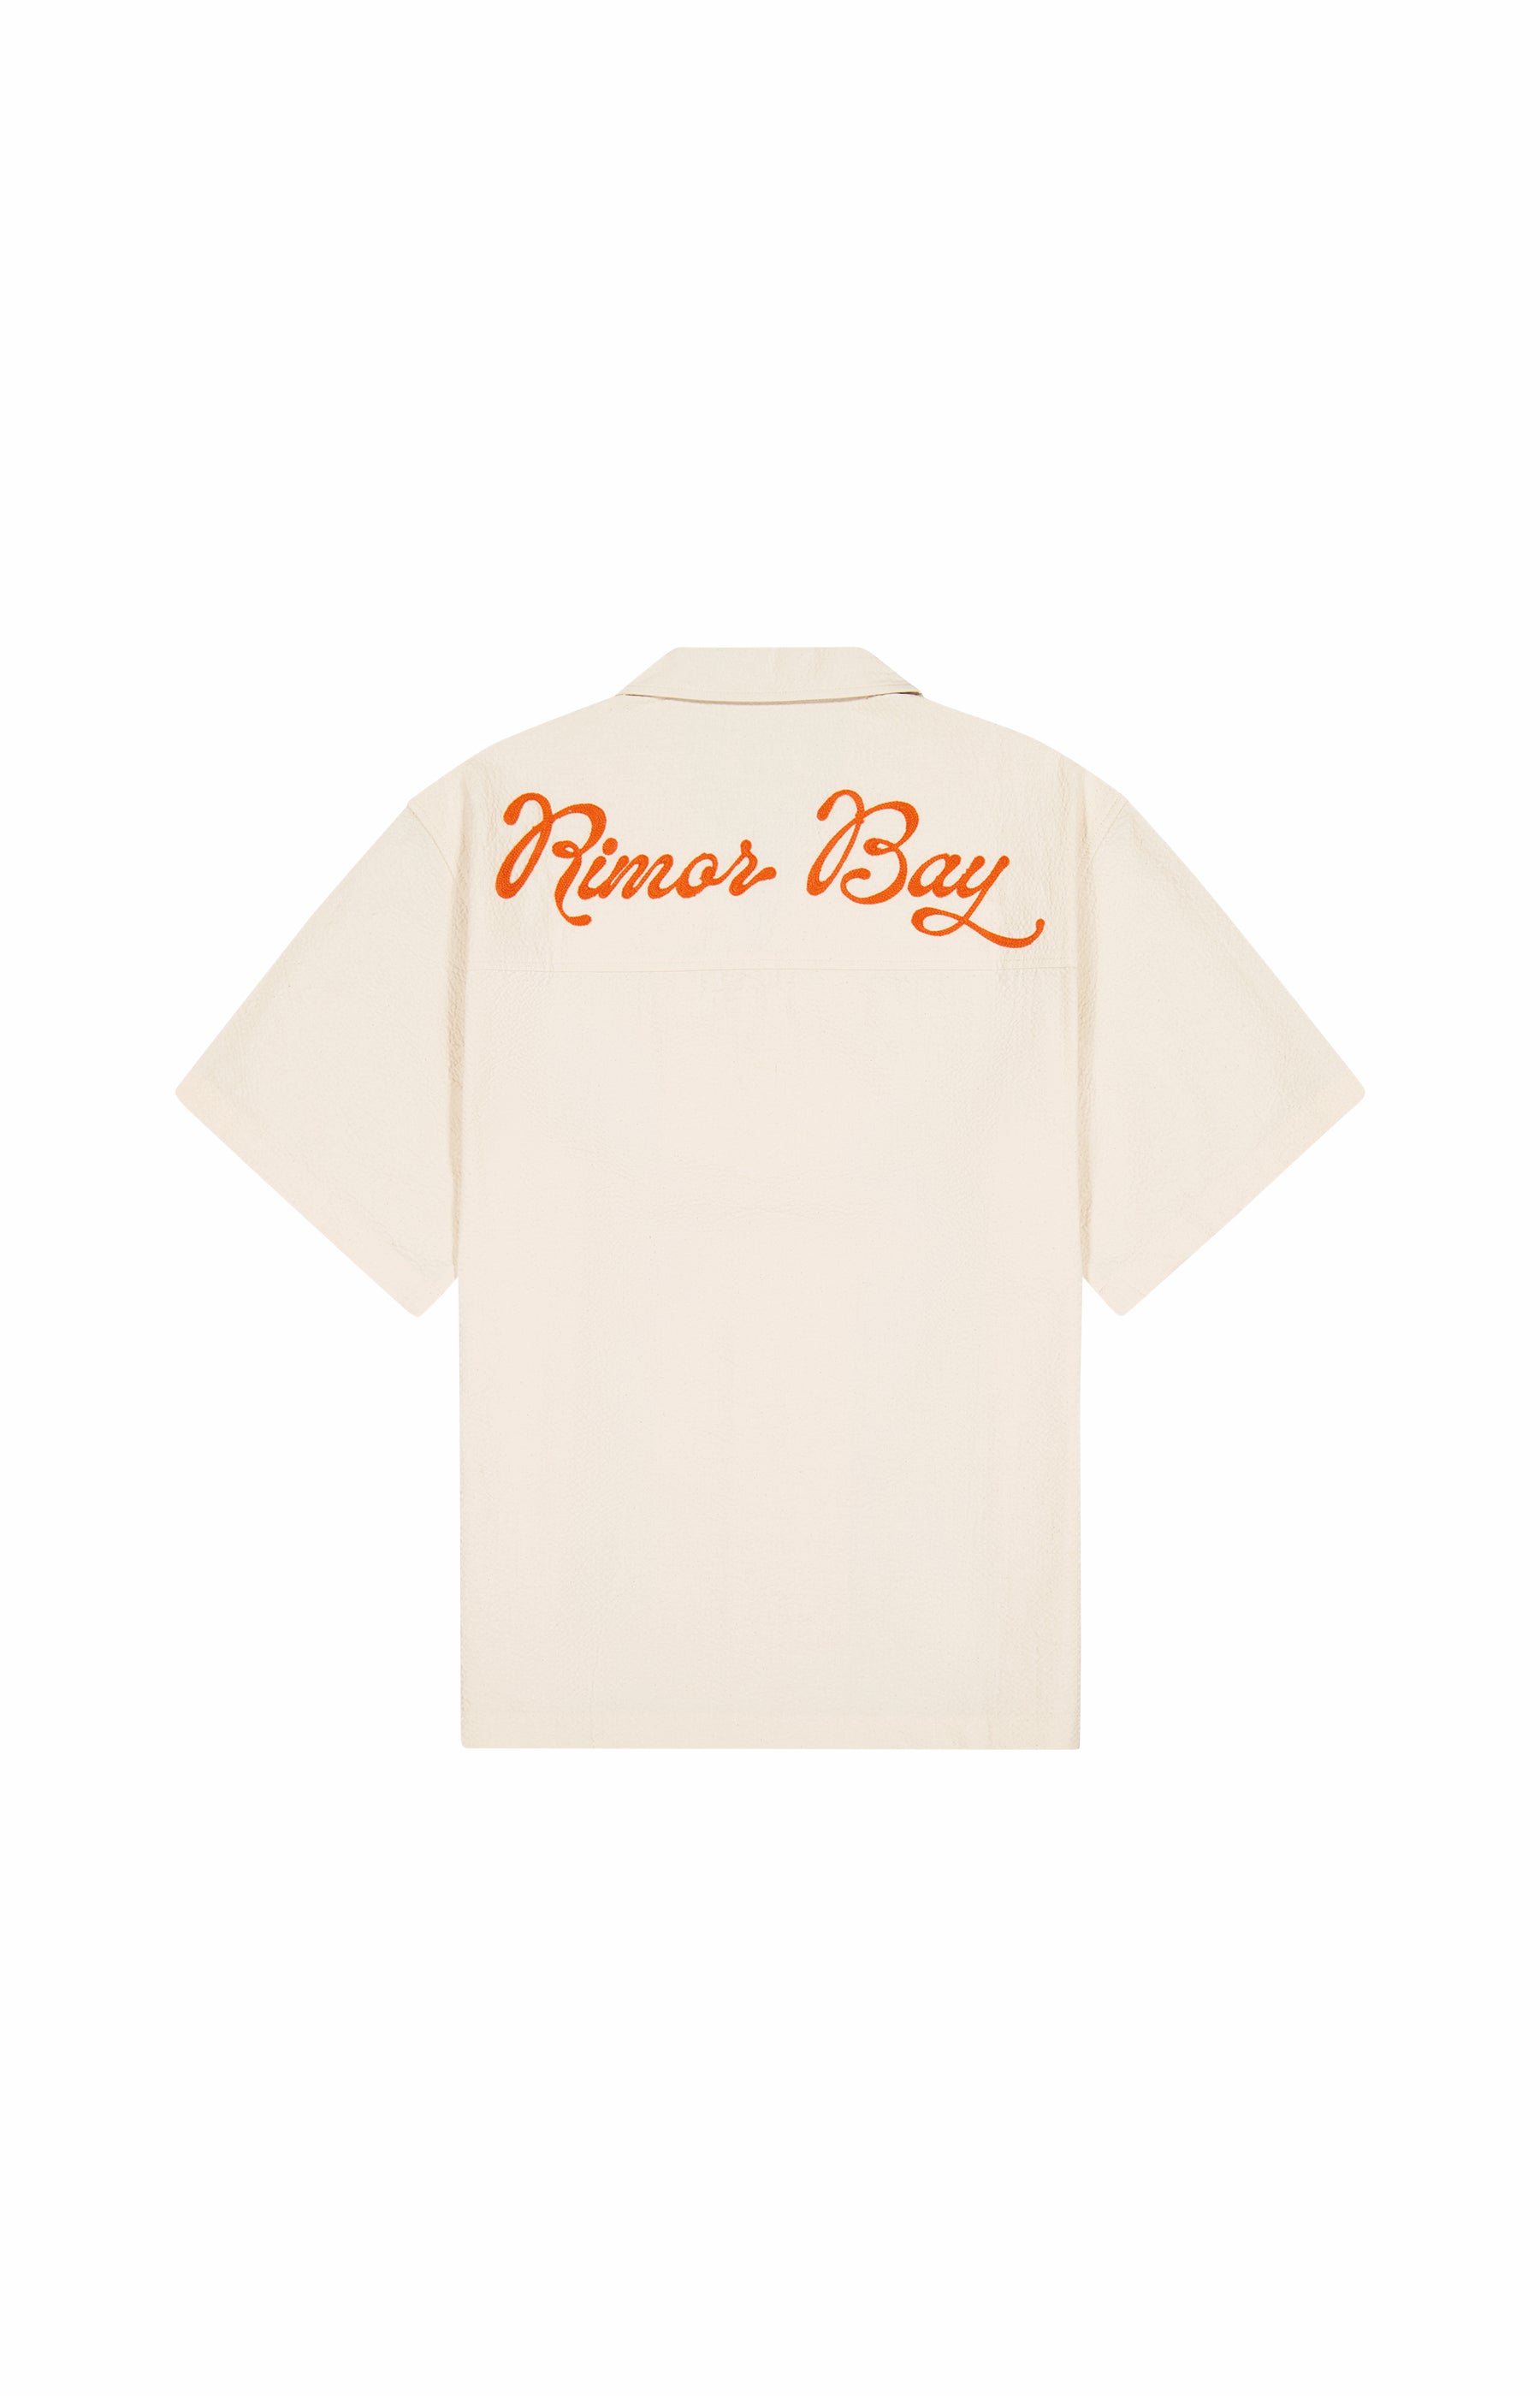 clearcut back of beige shirt with embroidered cursive logo